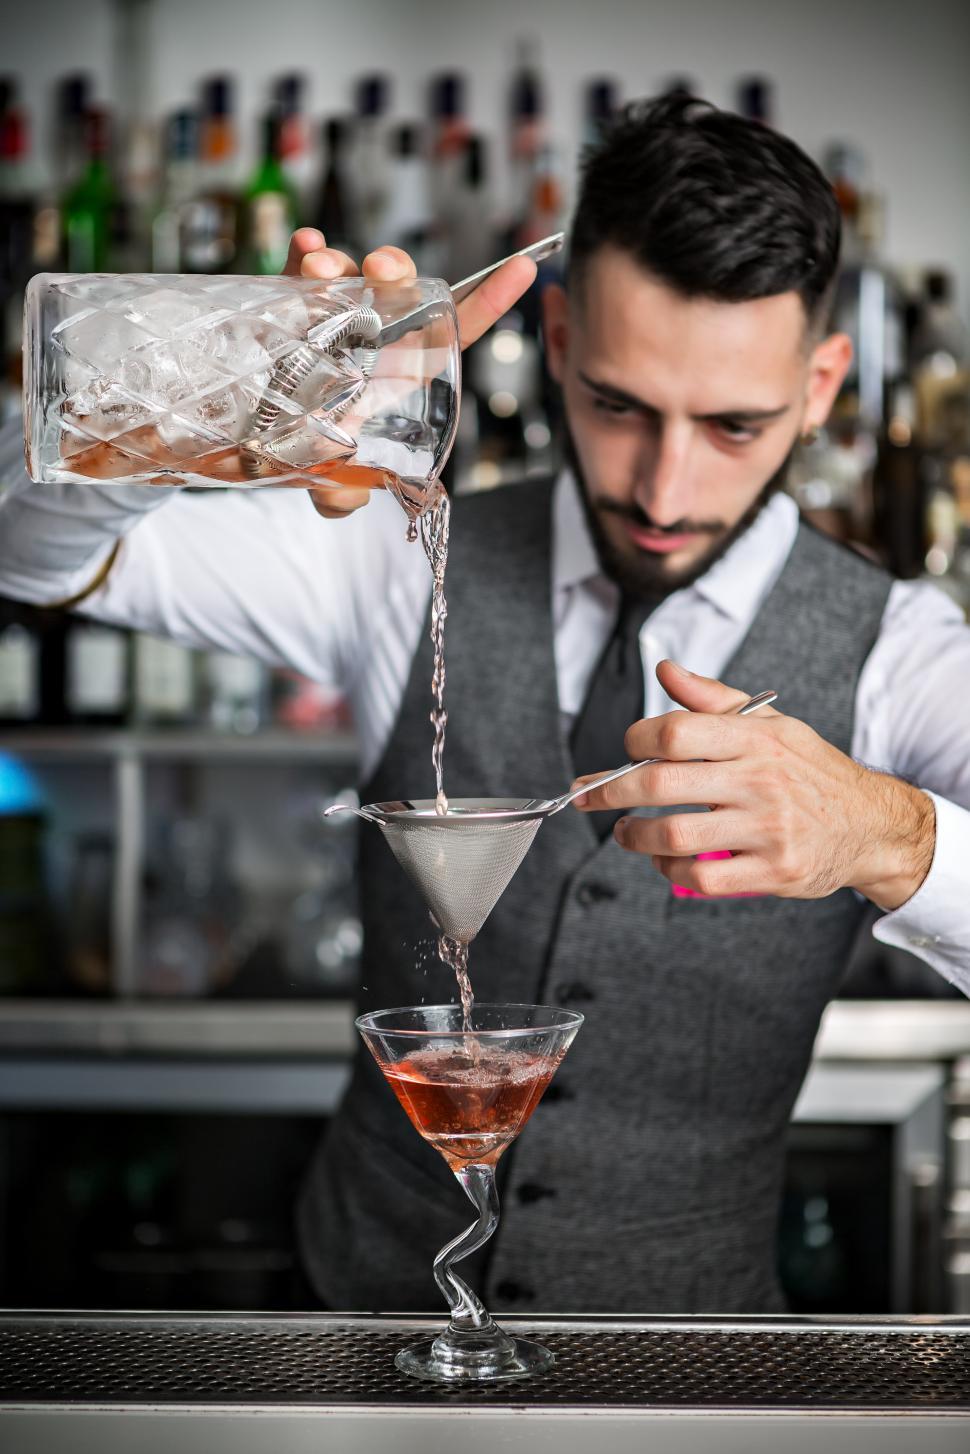 Download Free Stock Photo of Barman filling glass with cocktail 